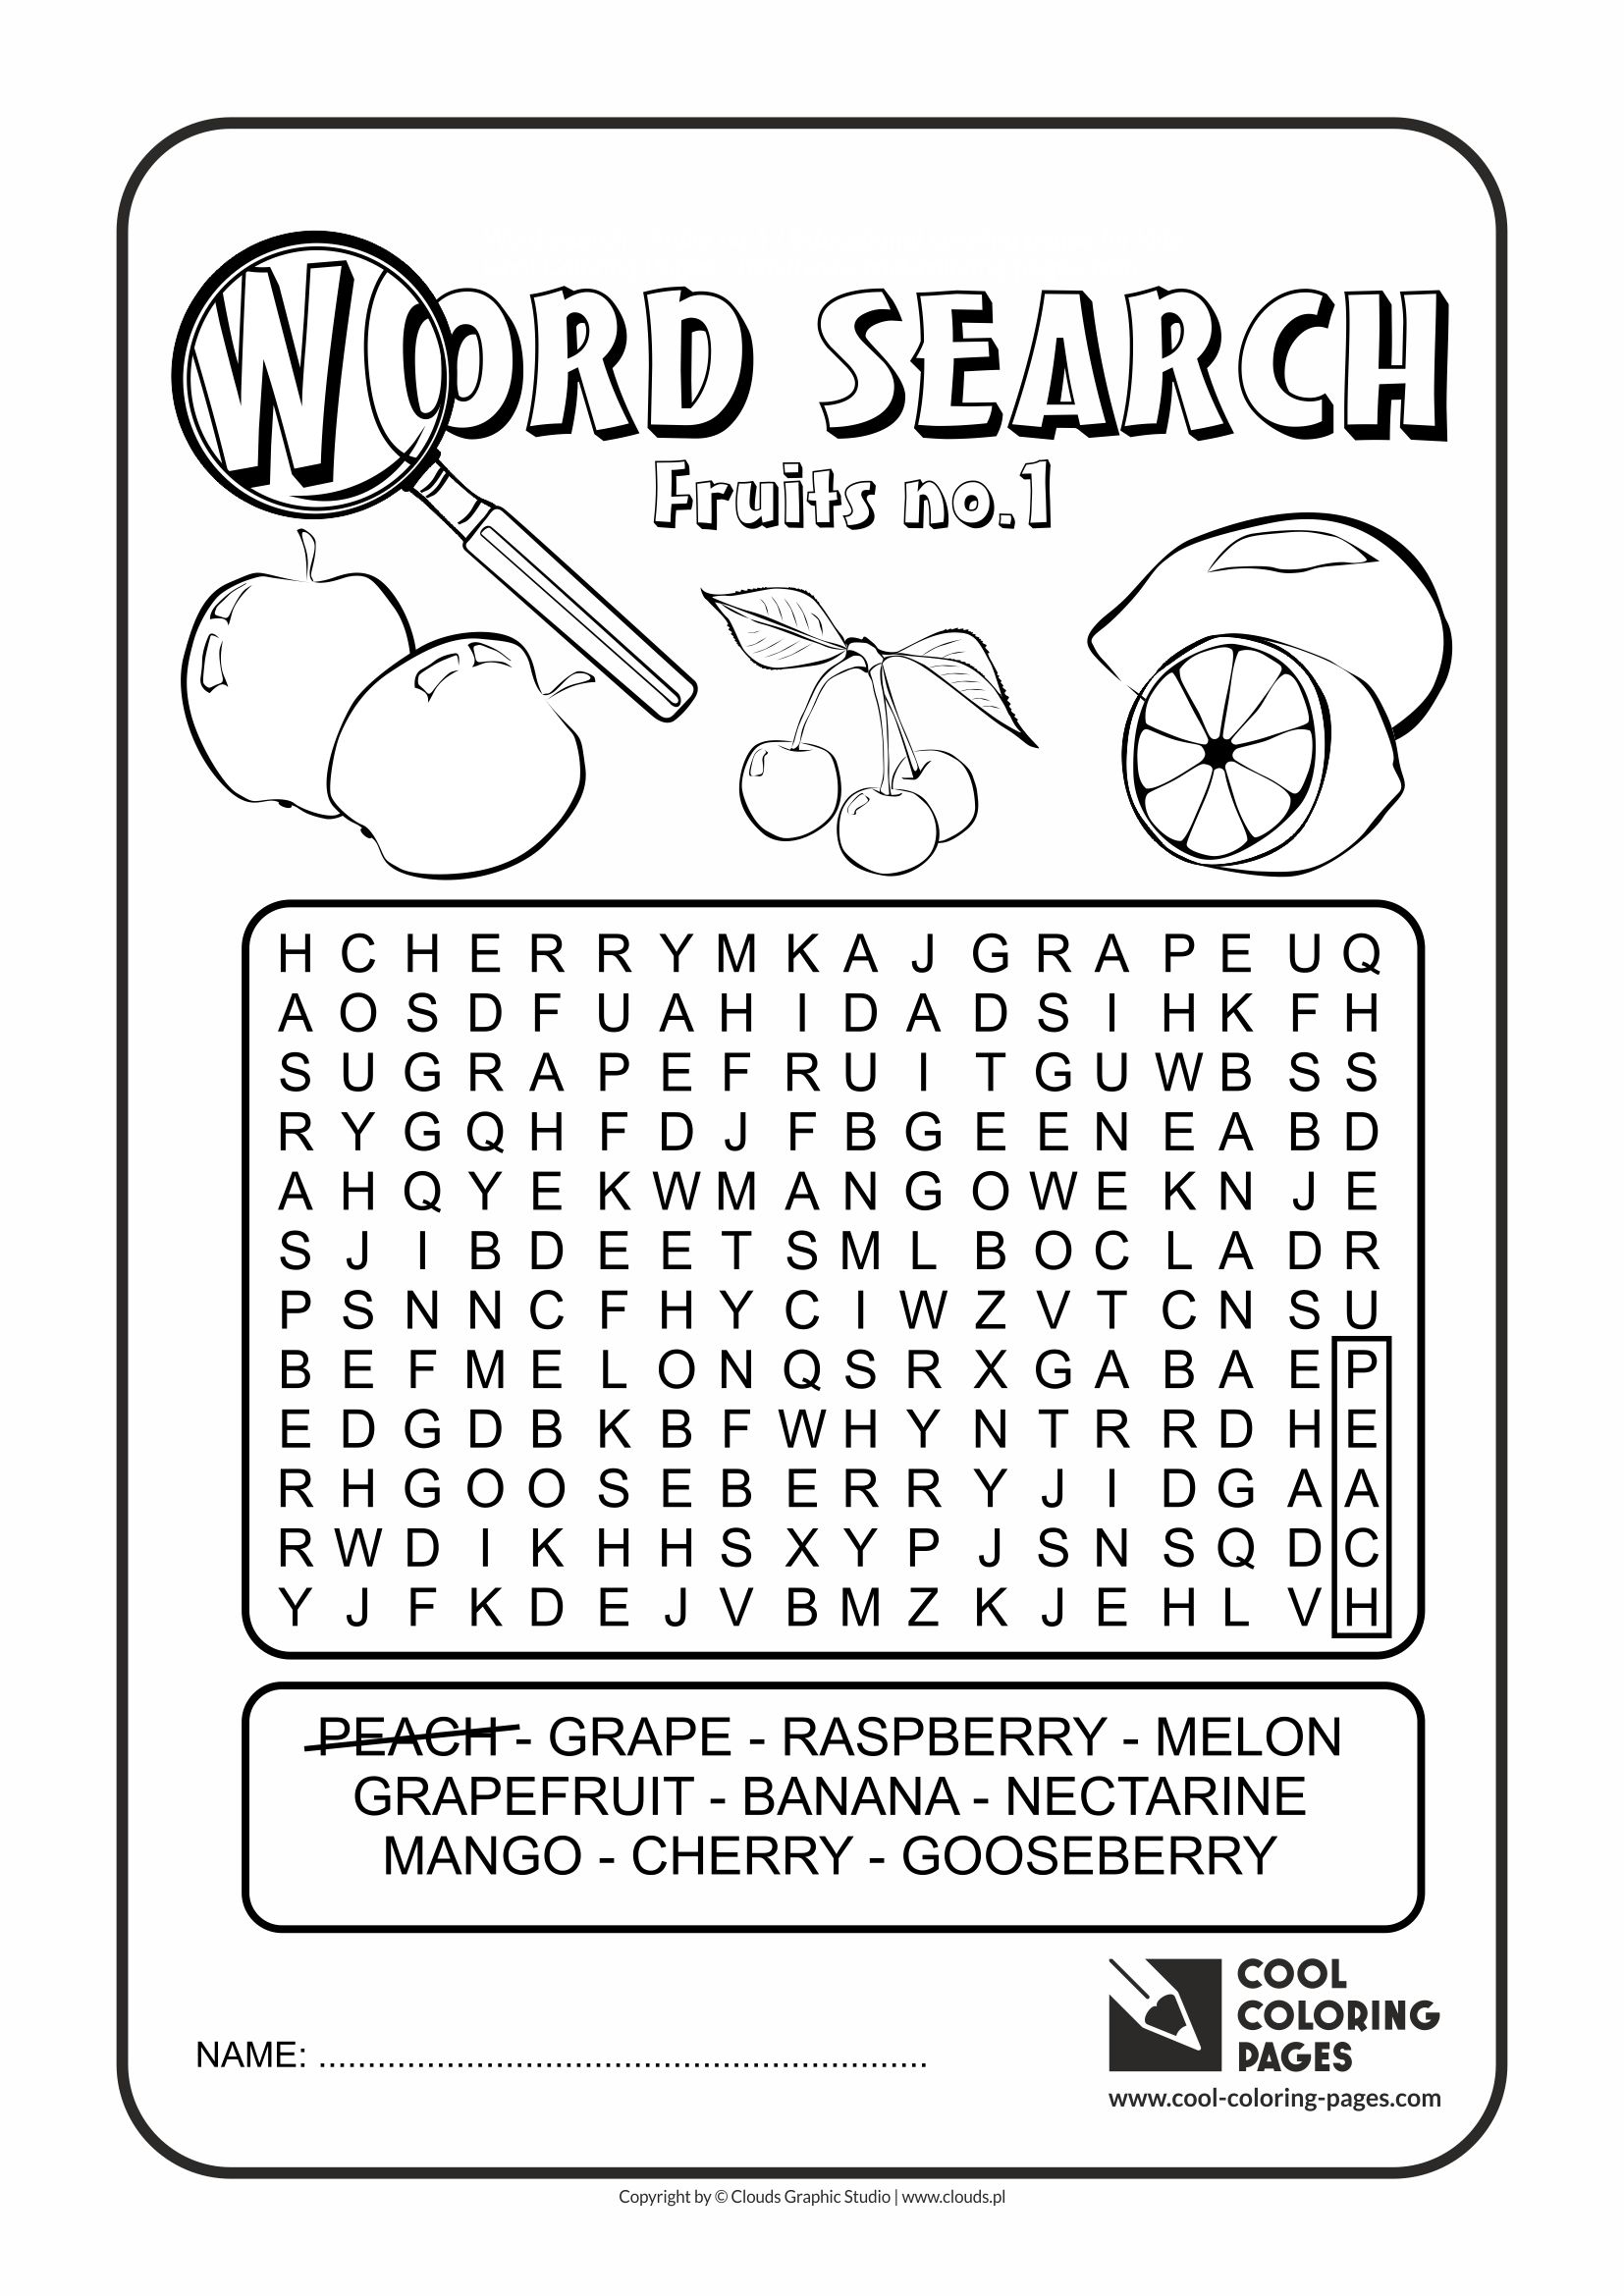 Download Cool Coloring Pages Word Search - Cool Coloring Pages | Free educational coloring pages and ...